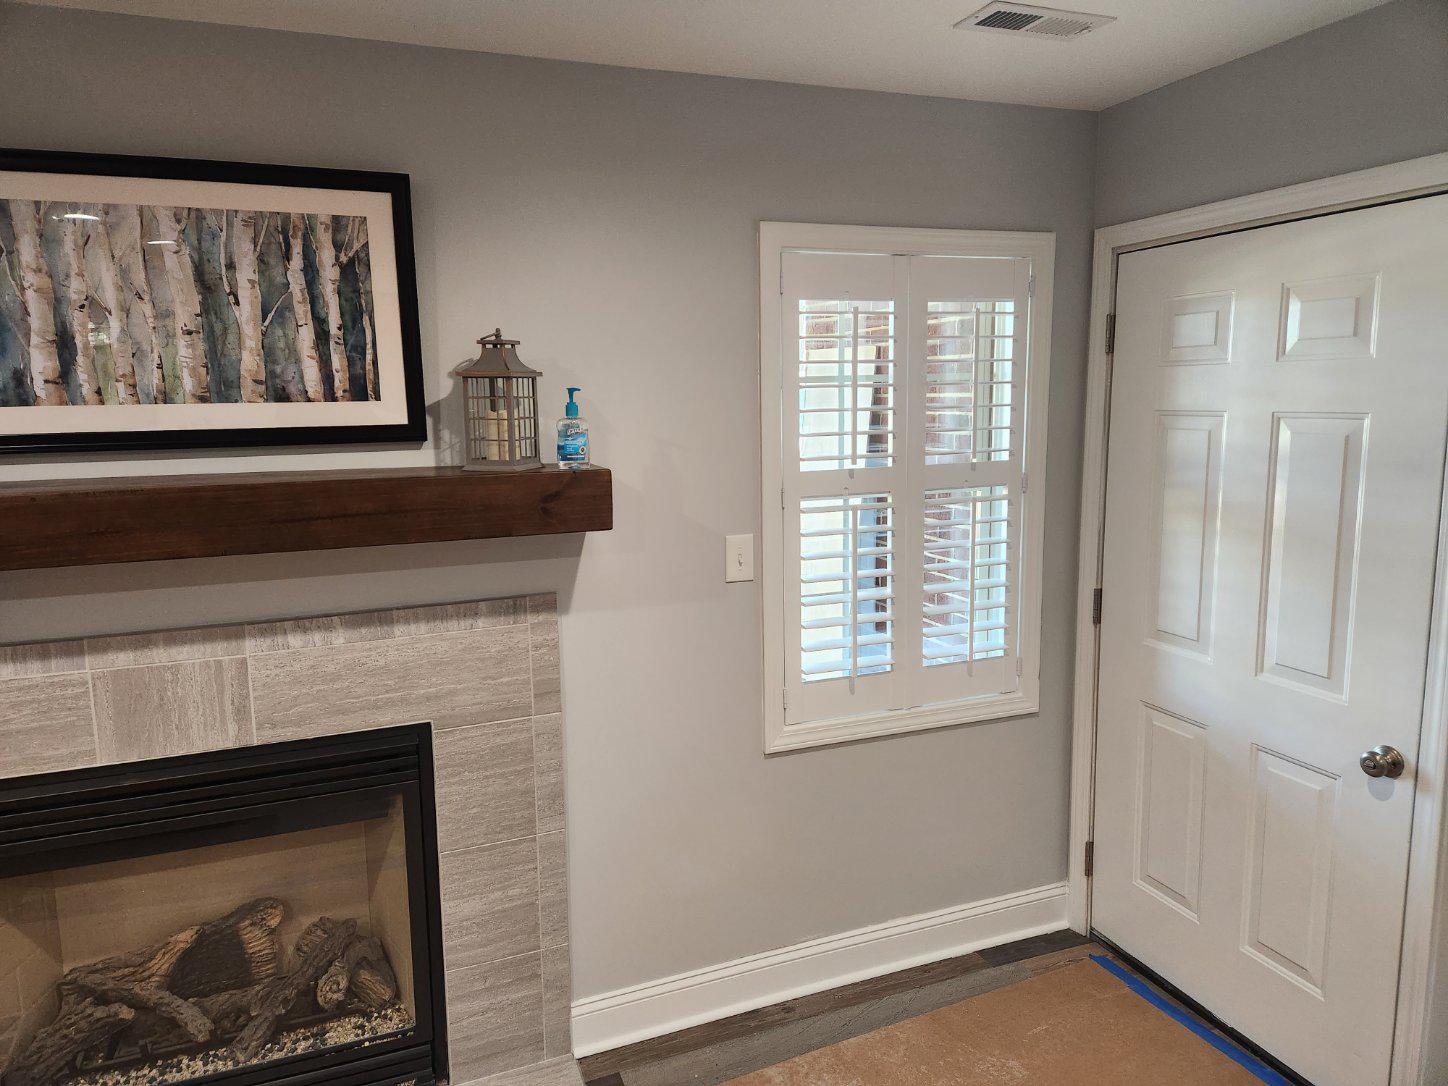 The shutters offer a classic, clean look to this serene space, blending seamlessly with the crisp li Budget Blinds of Knoxville & Maryville Knoxville (865)588-3377